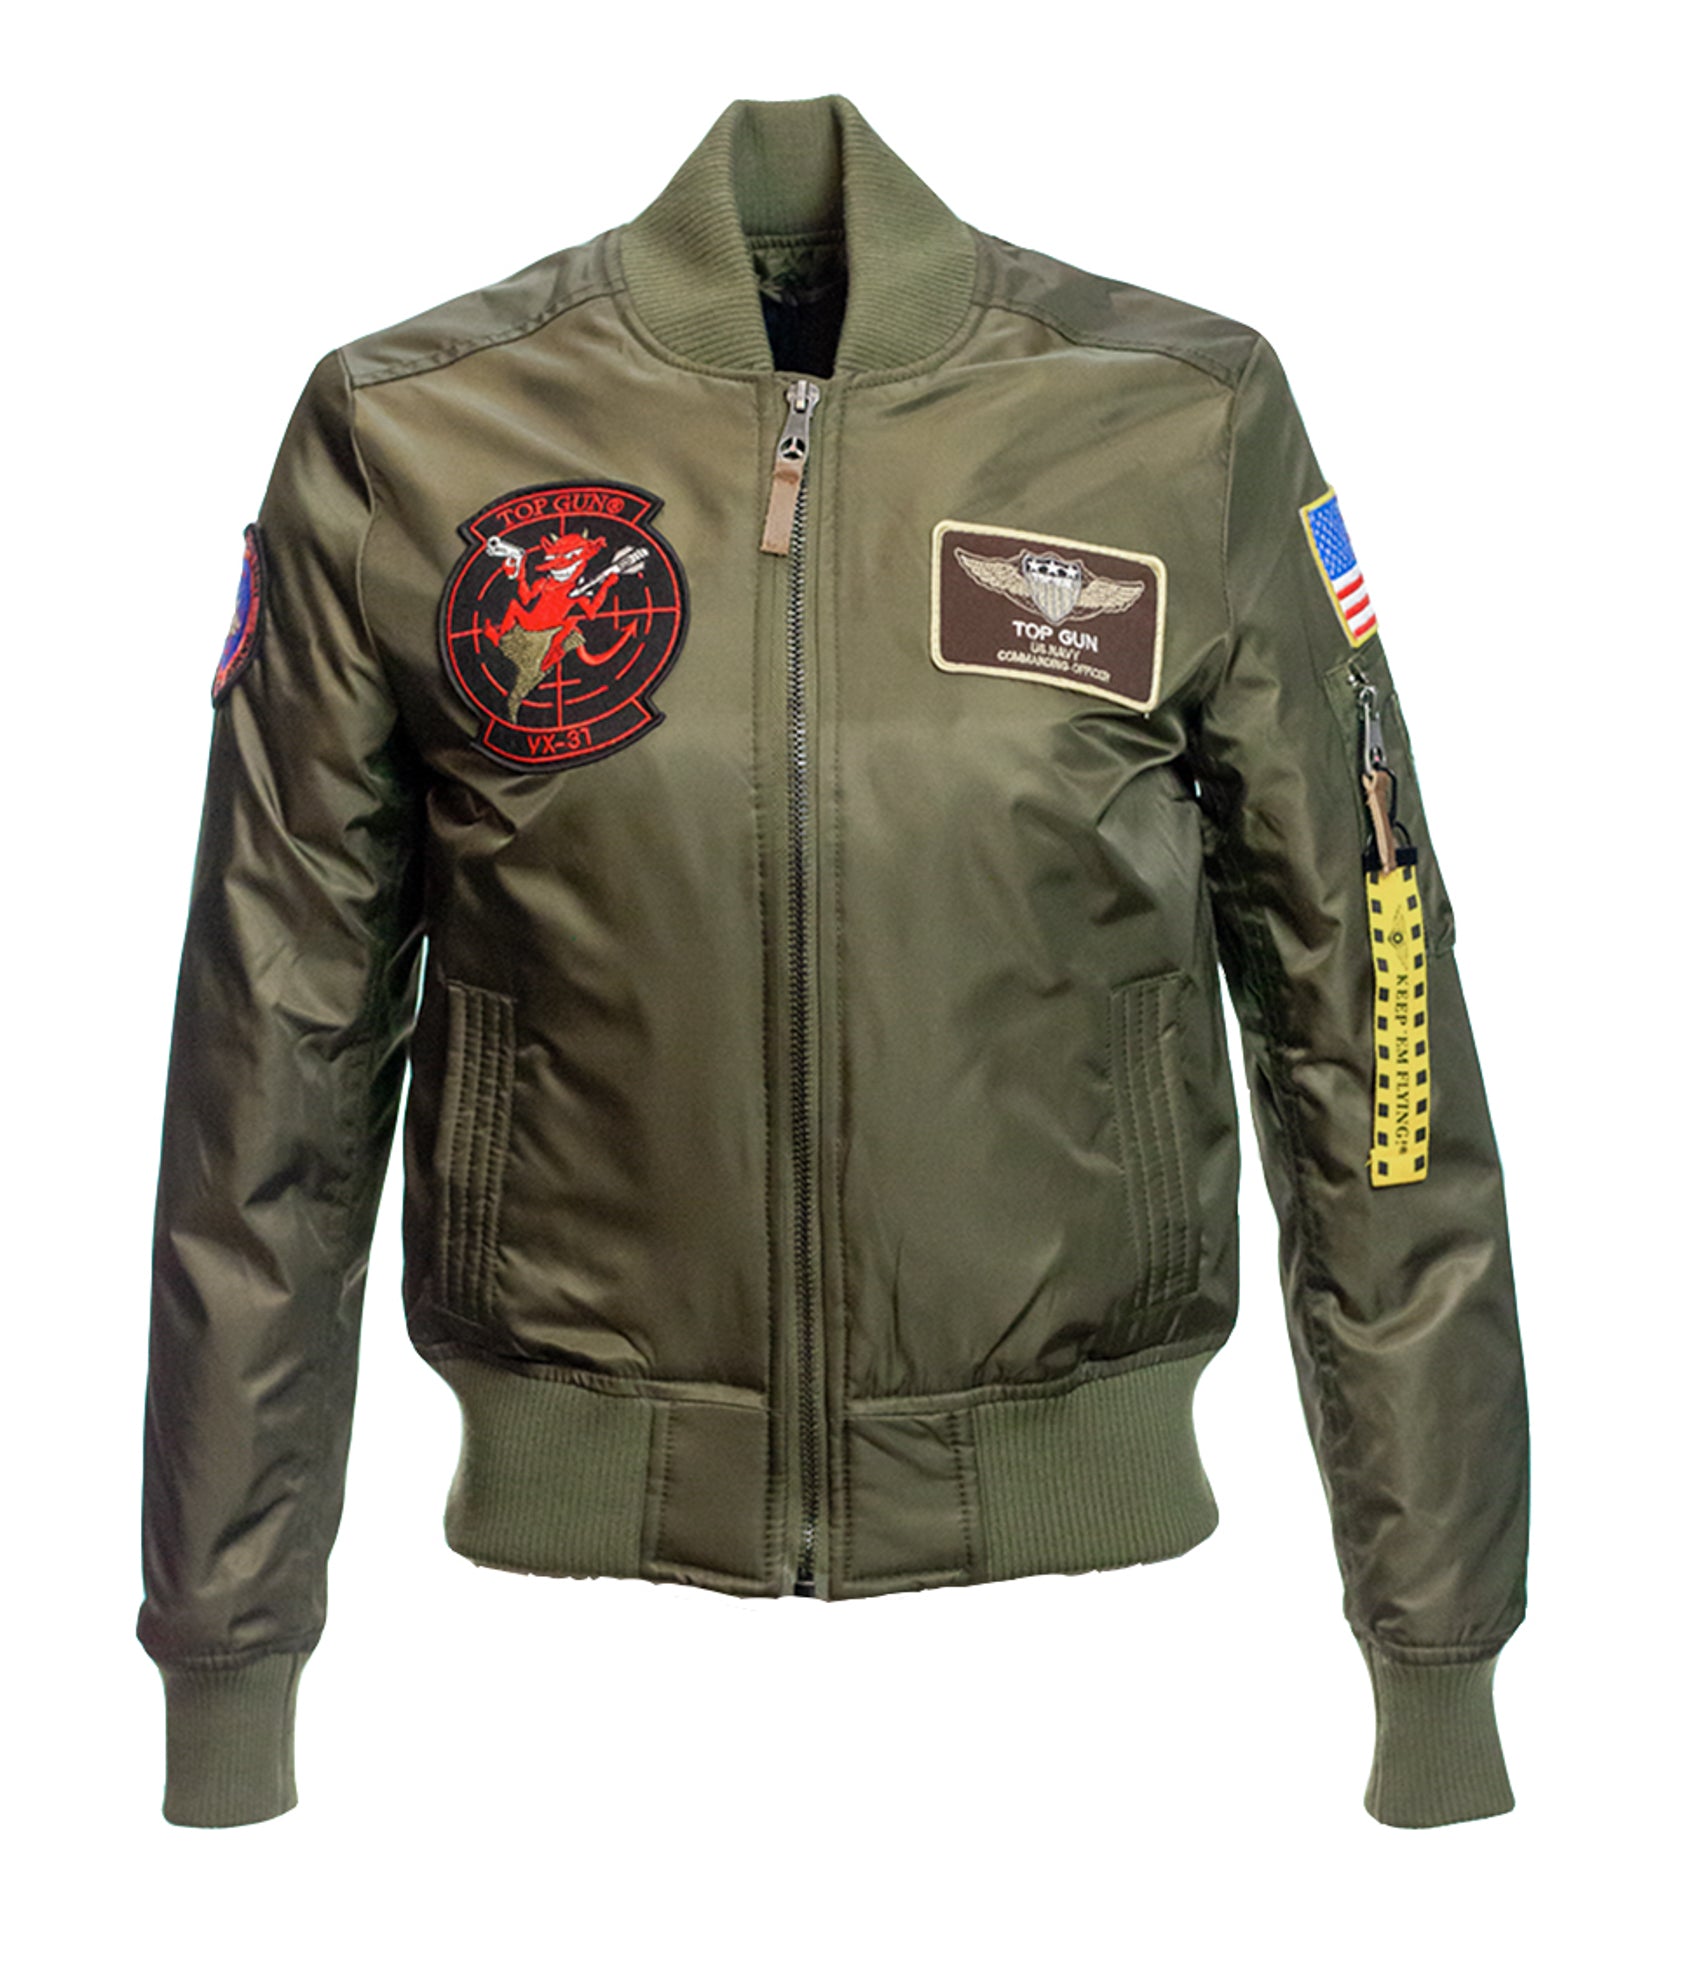 Alpha Industries Boys' MA-1 Bomber Jacket with Patches